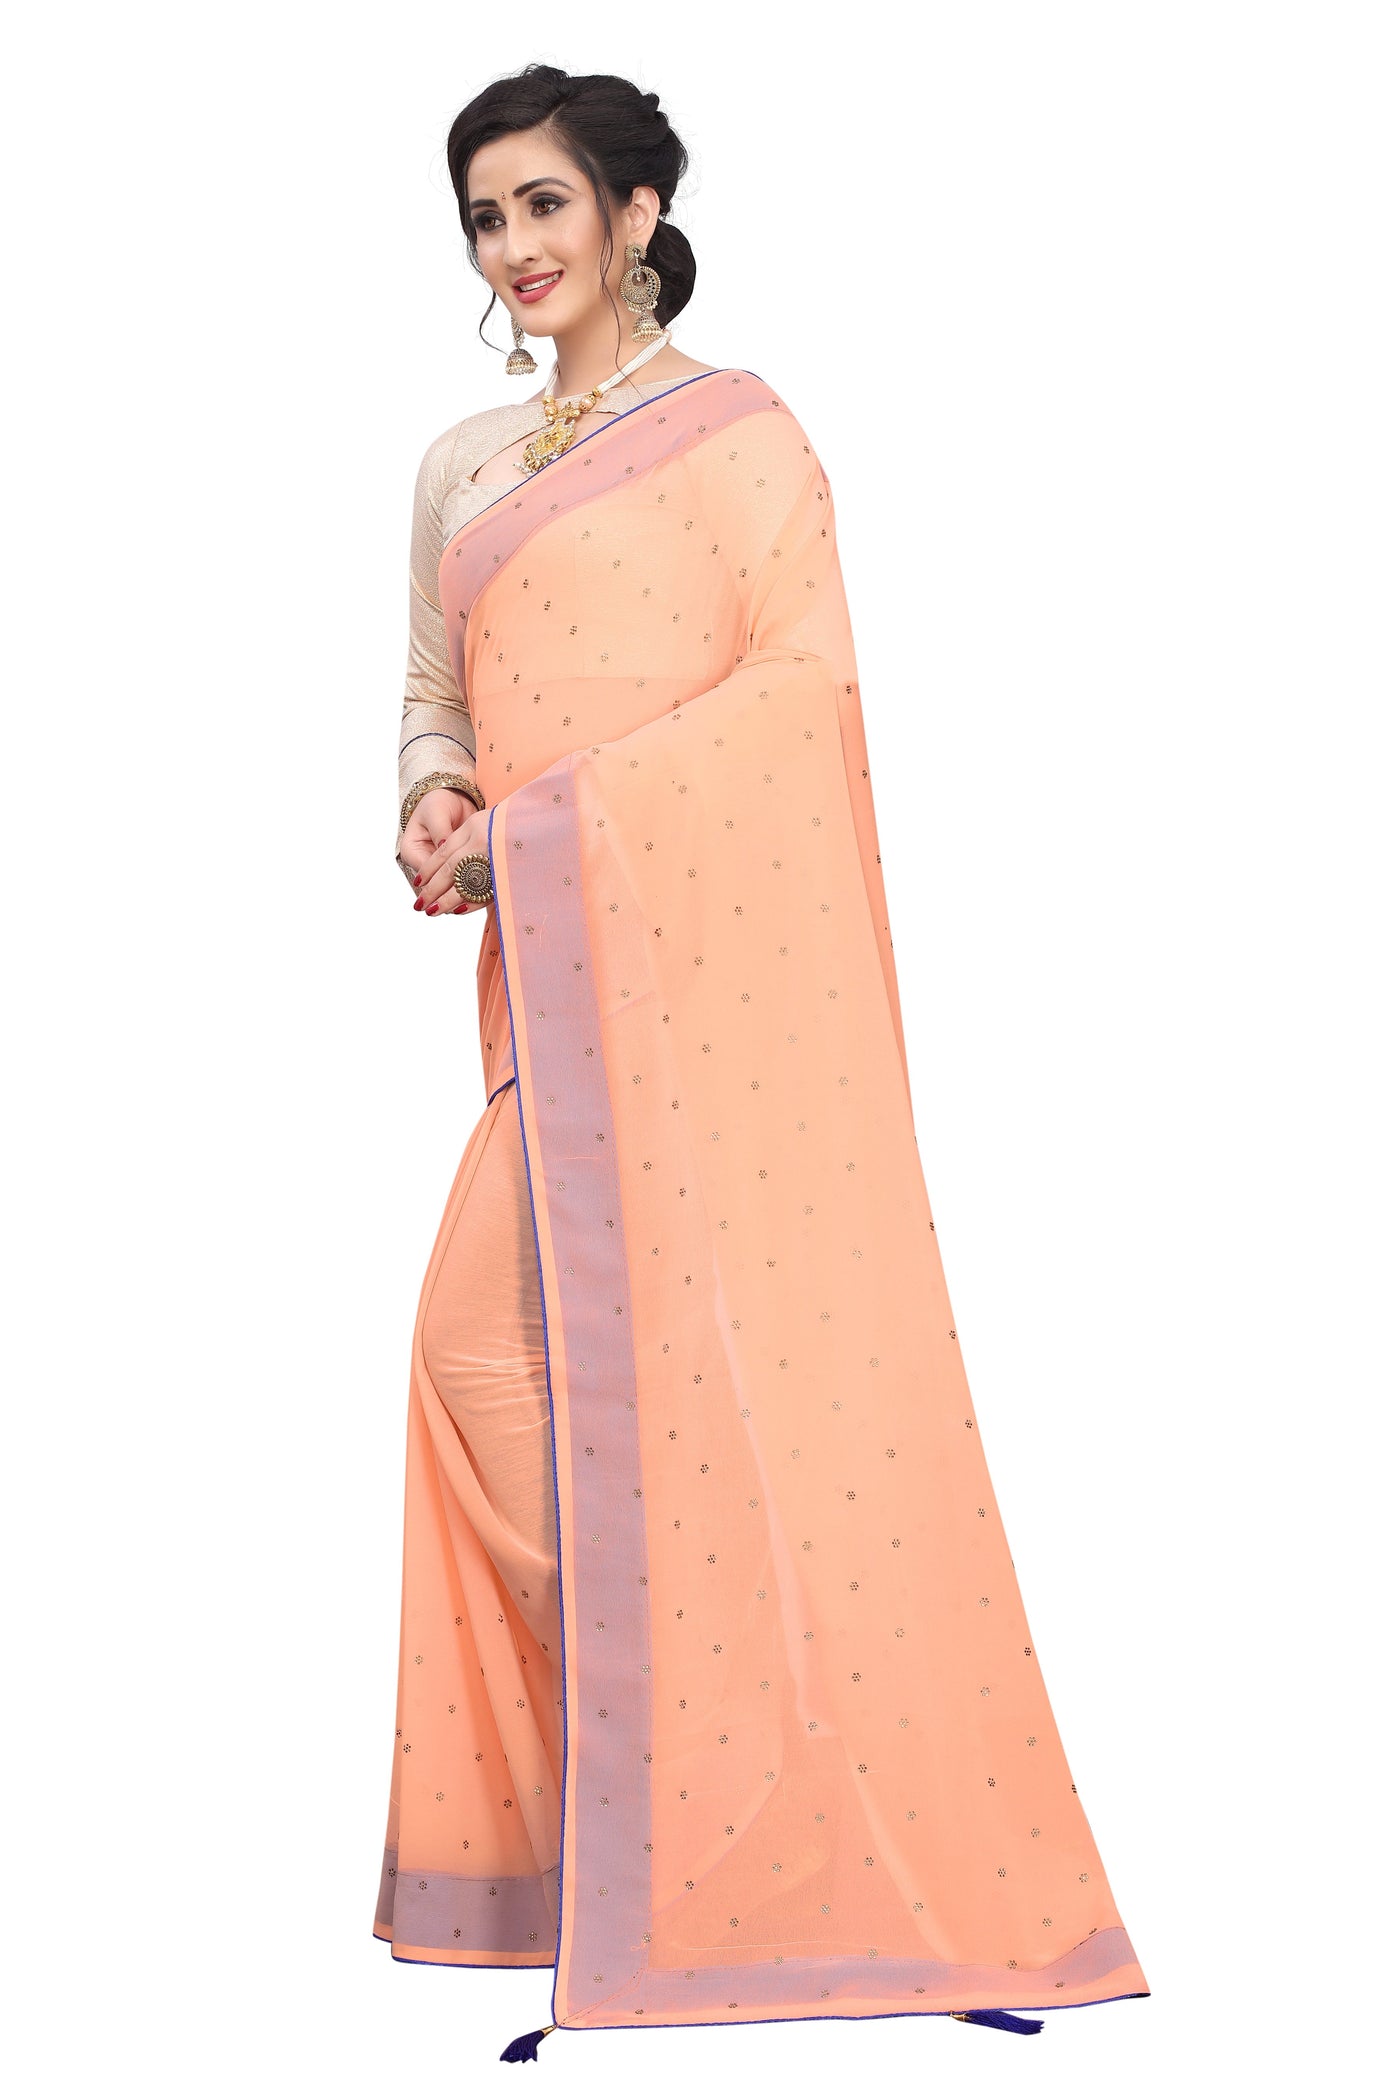 Georgette Satin Peach Saree With Blouse